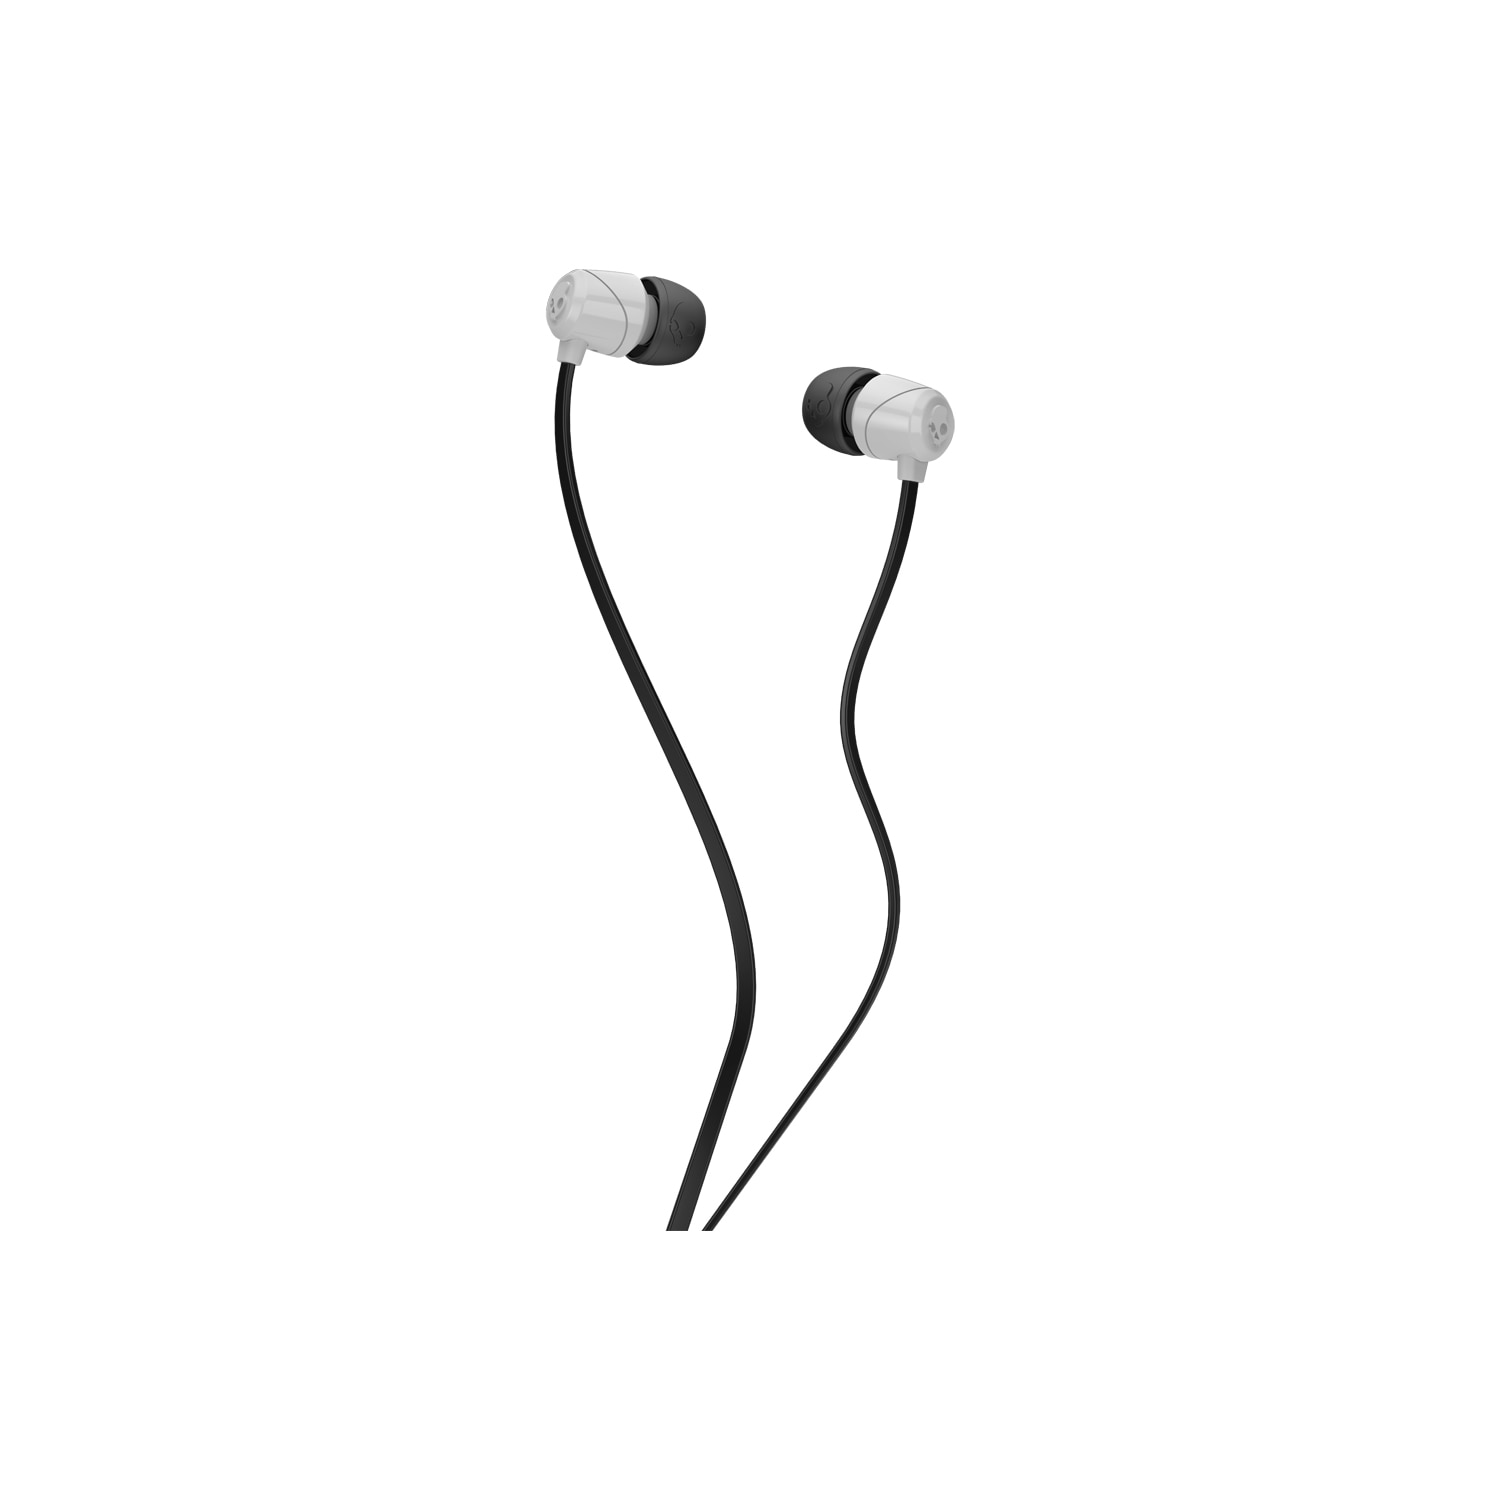 Skullcandy Jibs Non-Mic- Buy One, Get One 50% Off